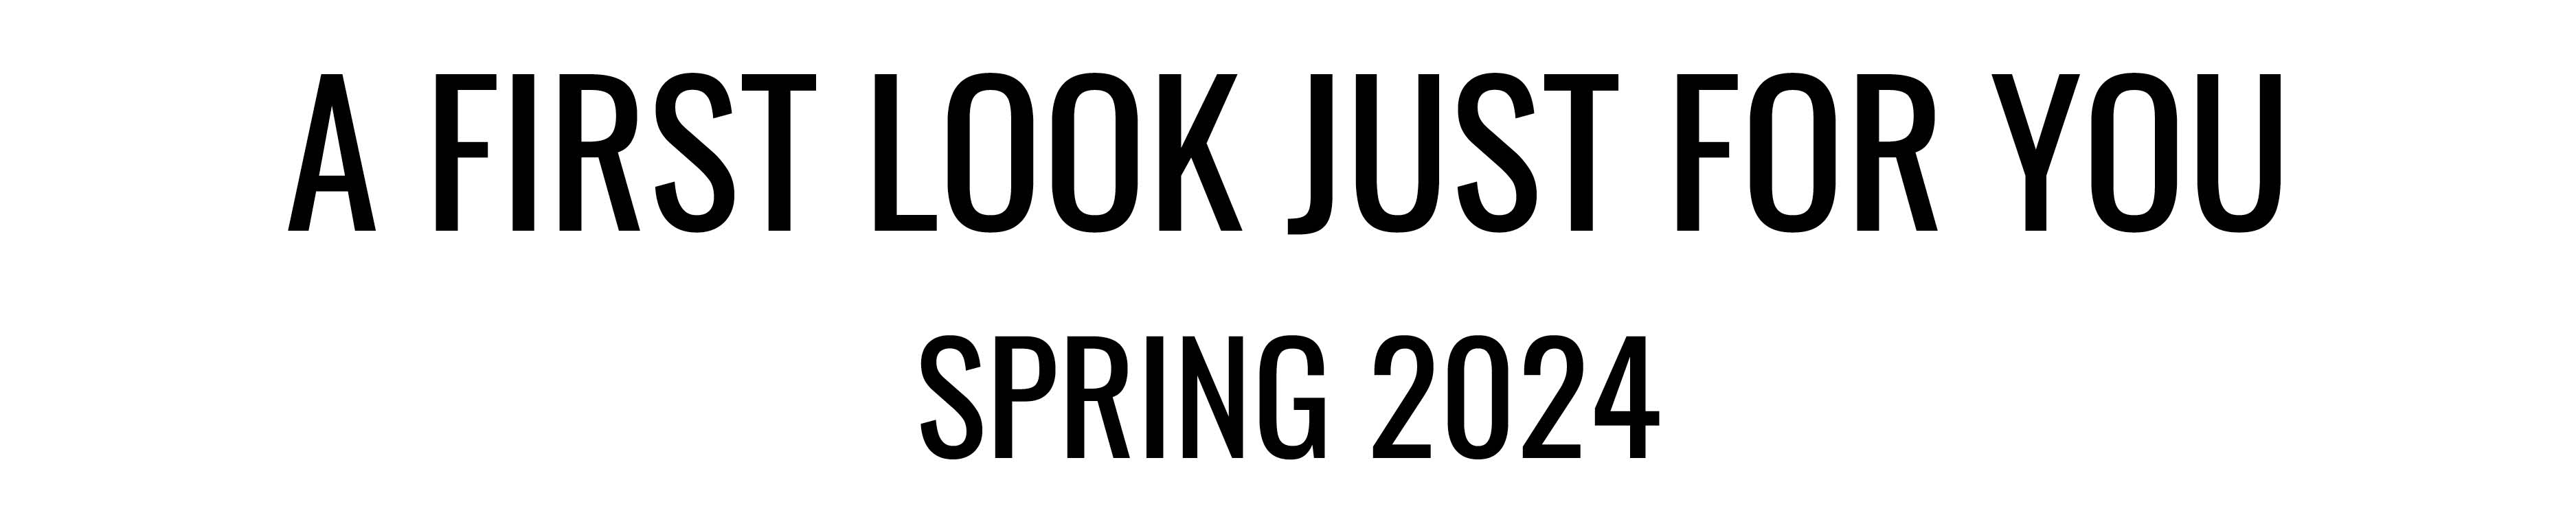 A FIRST LOOK JUST FOR YOU SPRING 2024